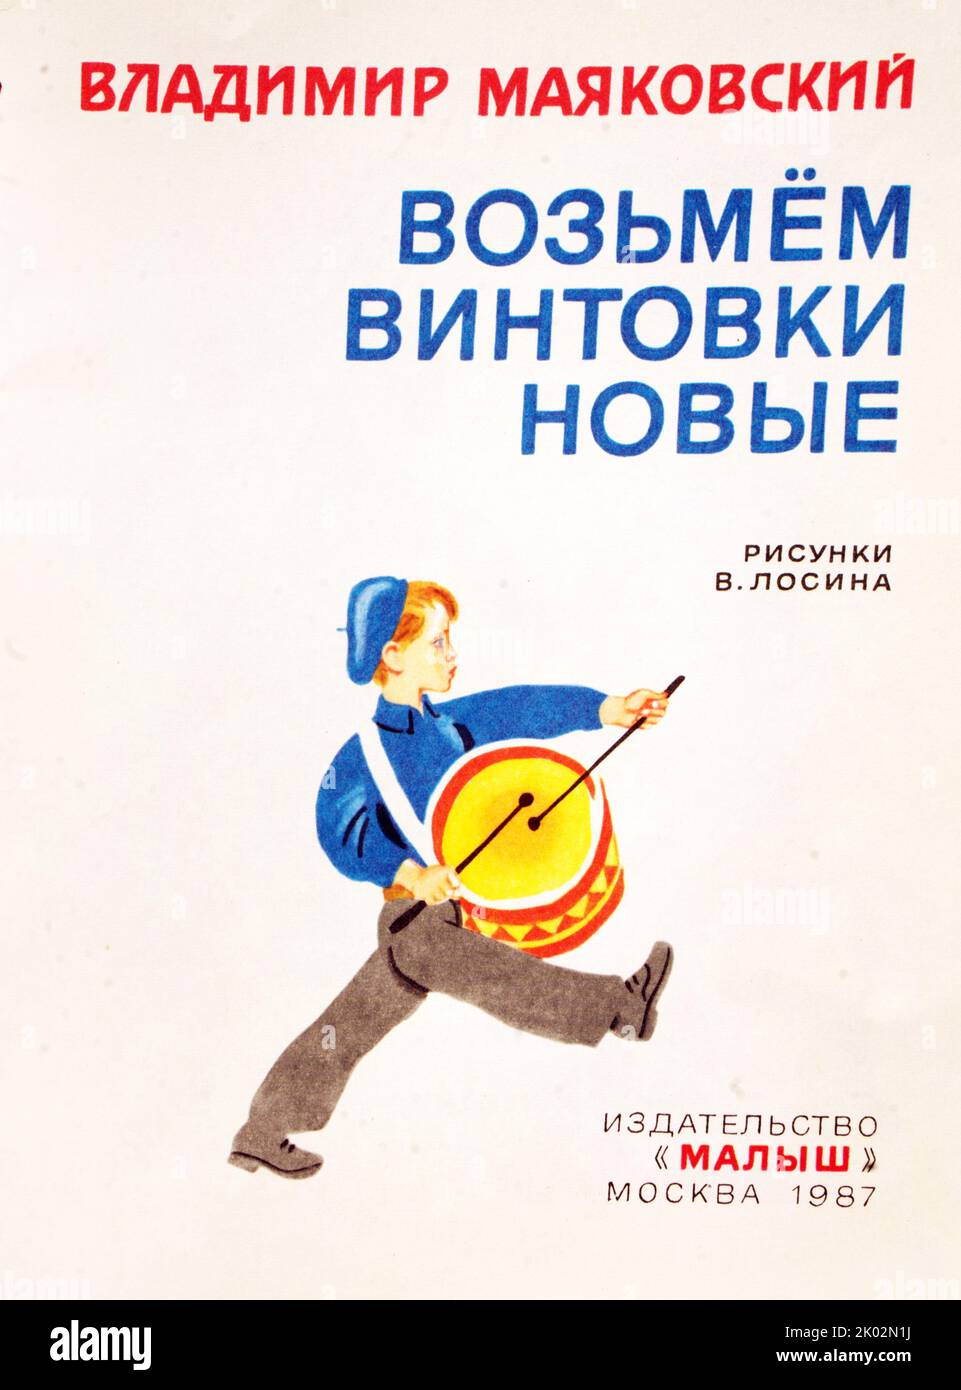 Children's book cover: Lets get hold of new rifles. Vladimir Mayakovski. Drawings by V. Losin. Publishing house Kid. Moscow, 1987. Stock Photo